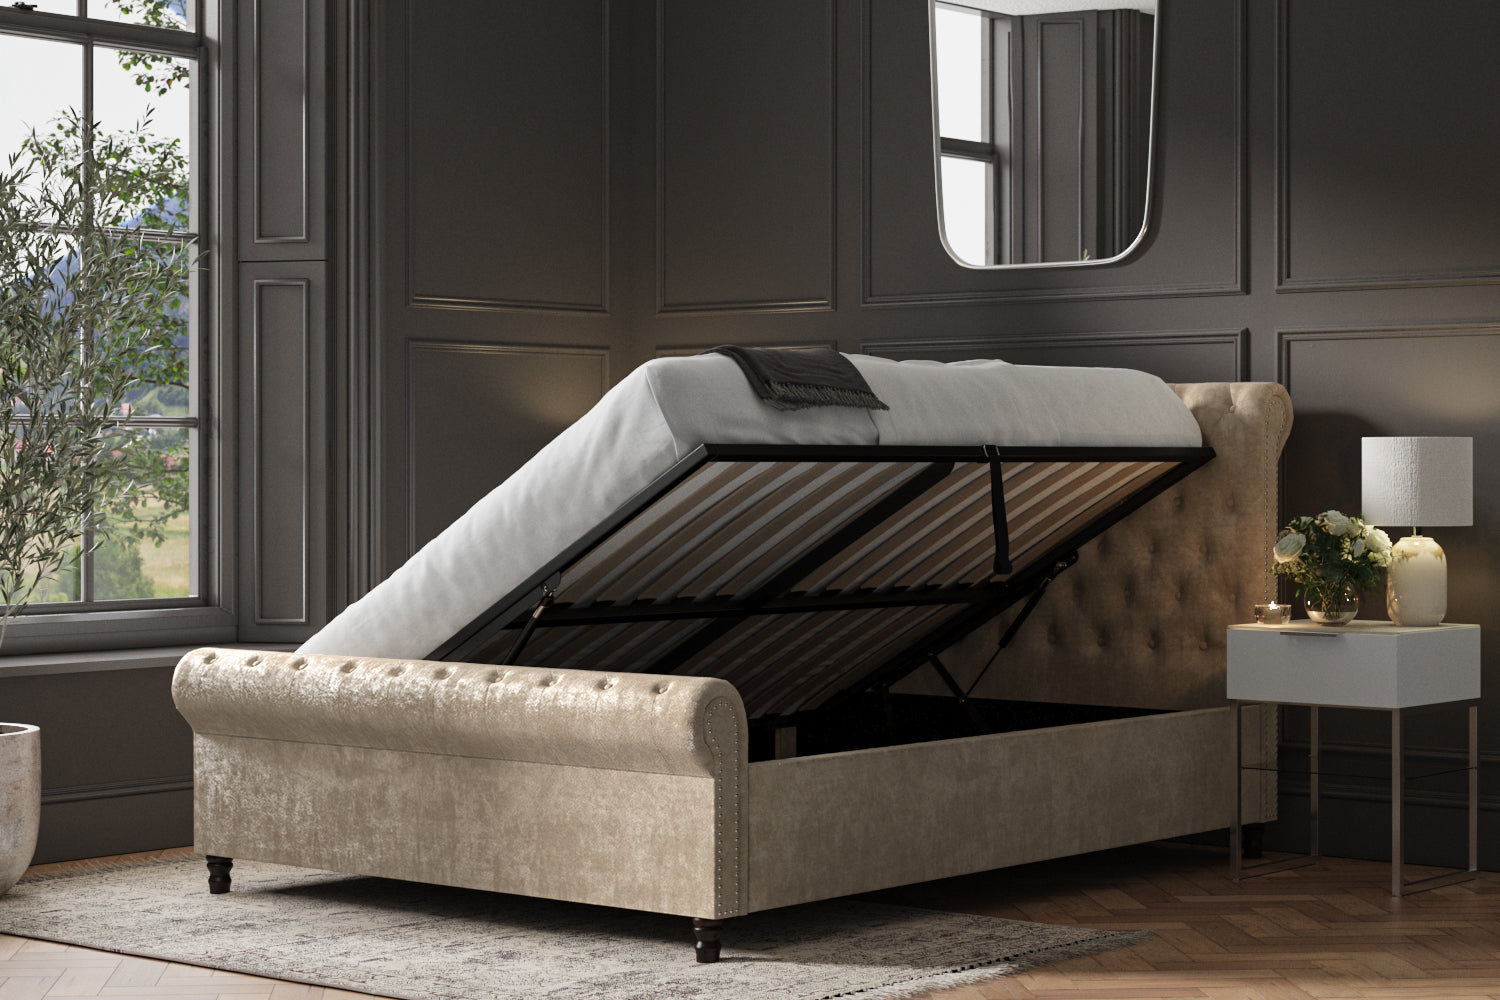 Emporia Beds Oxford Scroll Ottoman Bed Stone Open-Better Bed Company